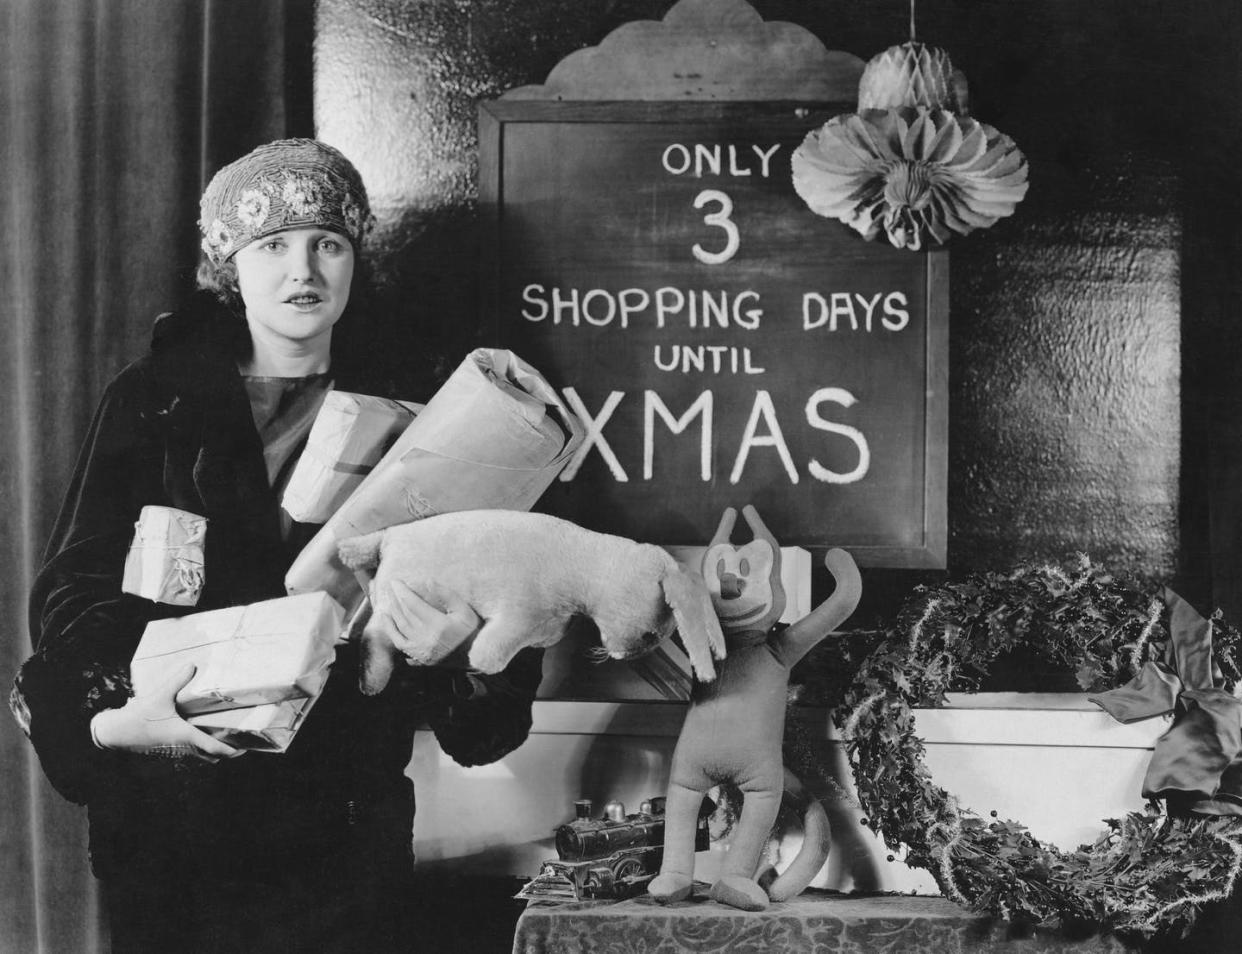 <span class="caption">Last-minute shopping can be stressful.</span> <span class="attribution"><span class="source">Everett Collection/Shutterstock.com</span></span>